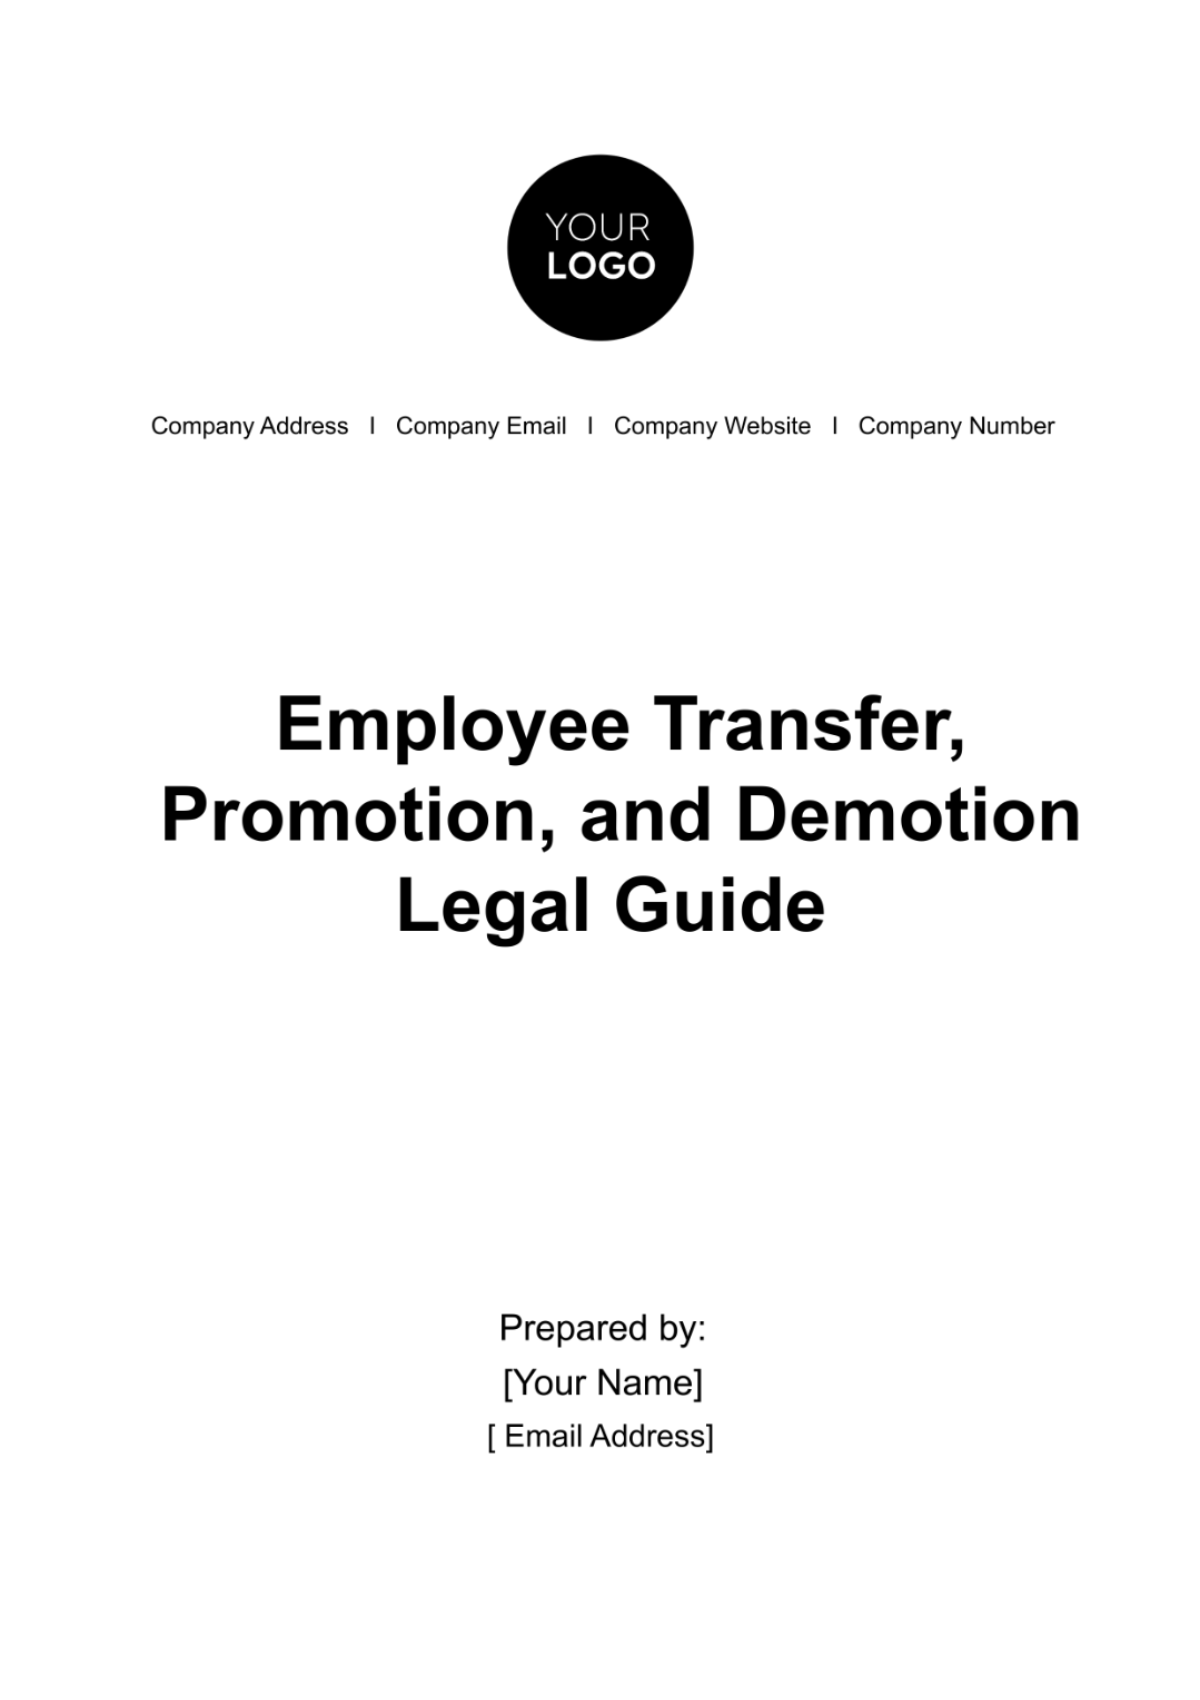 Free Employee Transfer, Promotion, and Demotion Legal Guide HR Template